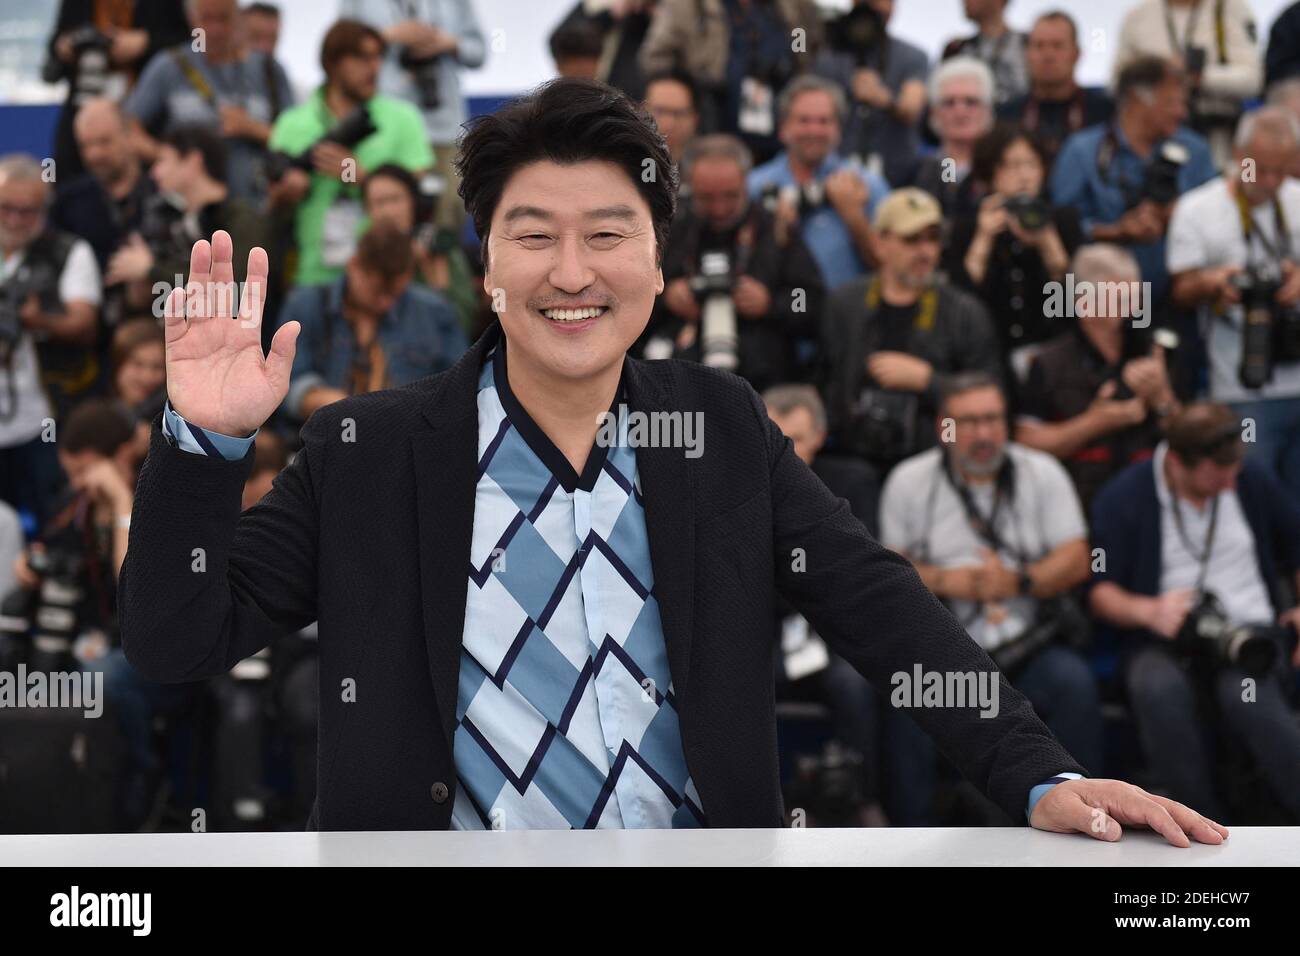 Song Kang-ho attends the photocall for 'Parasite' during the 72nd annual Cannes Film Festival on May 22, 2019 in Cannes, France Stock Photo